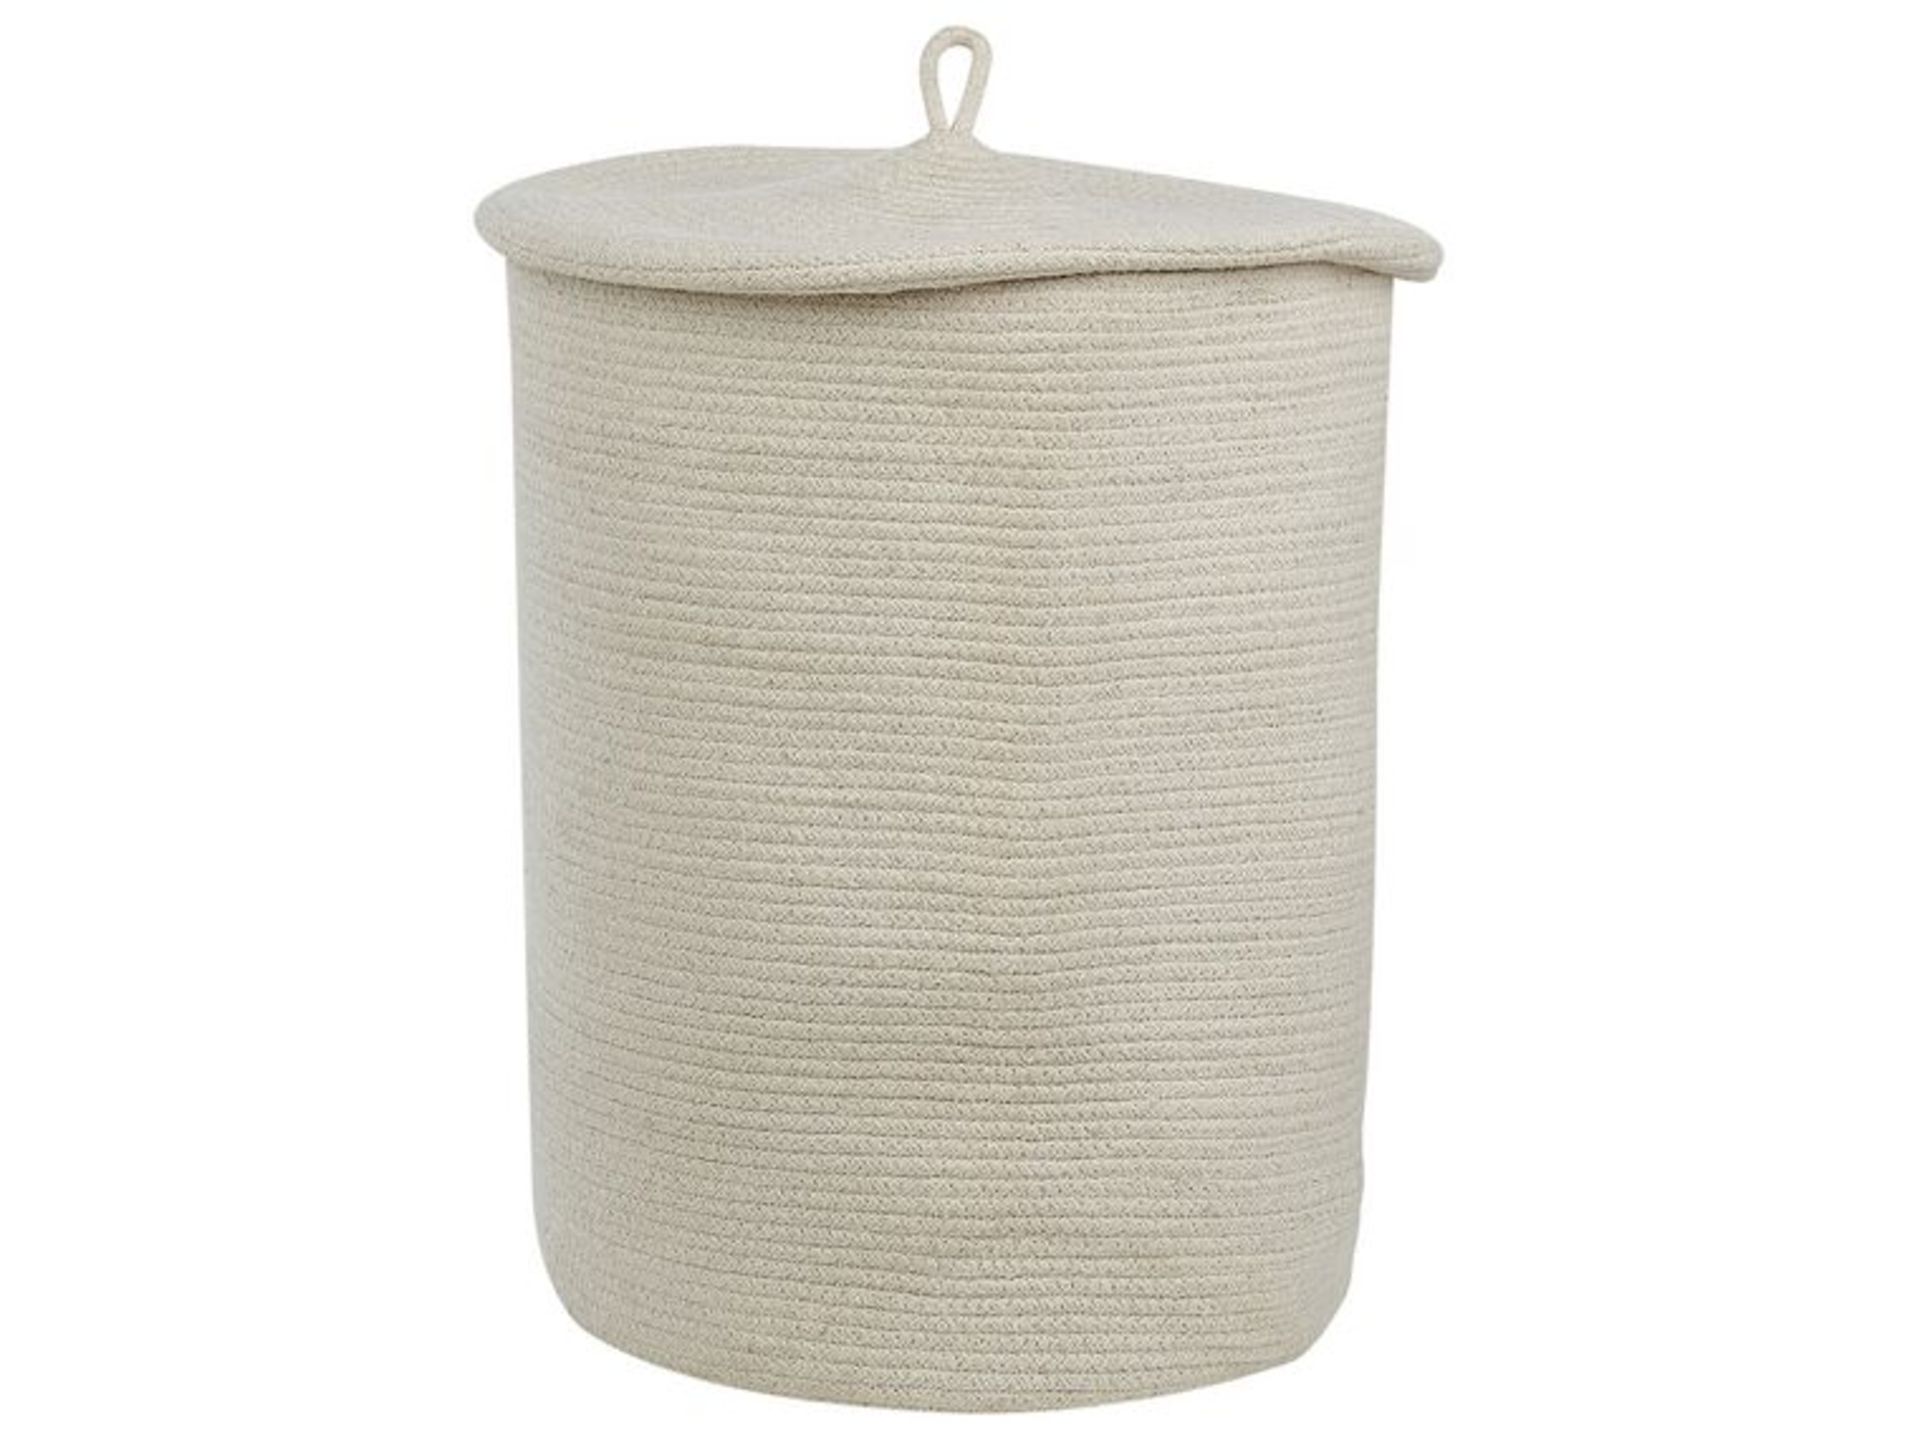 Silopi Cotton Basket with Lid Off-White. - ER. This basket is going to look perfect in your boho-